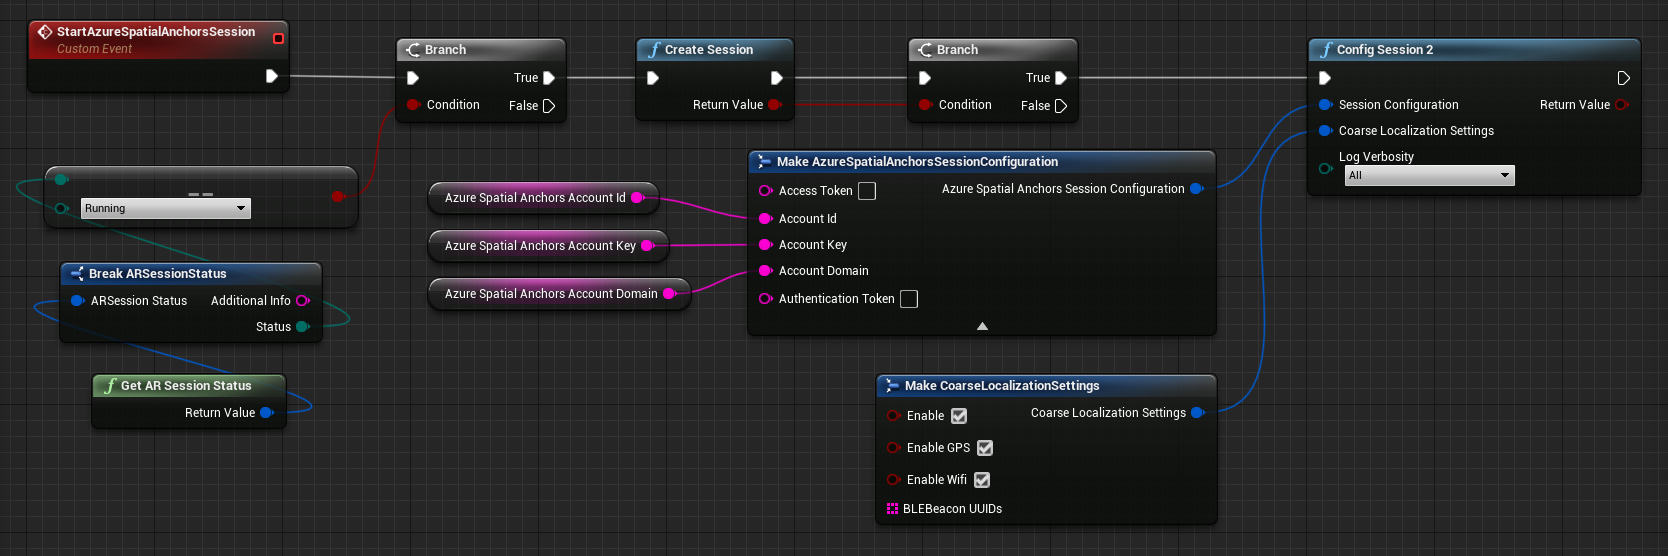 Blueprint of config session function with account id and key added